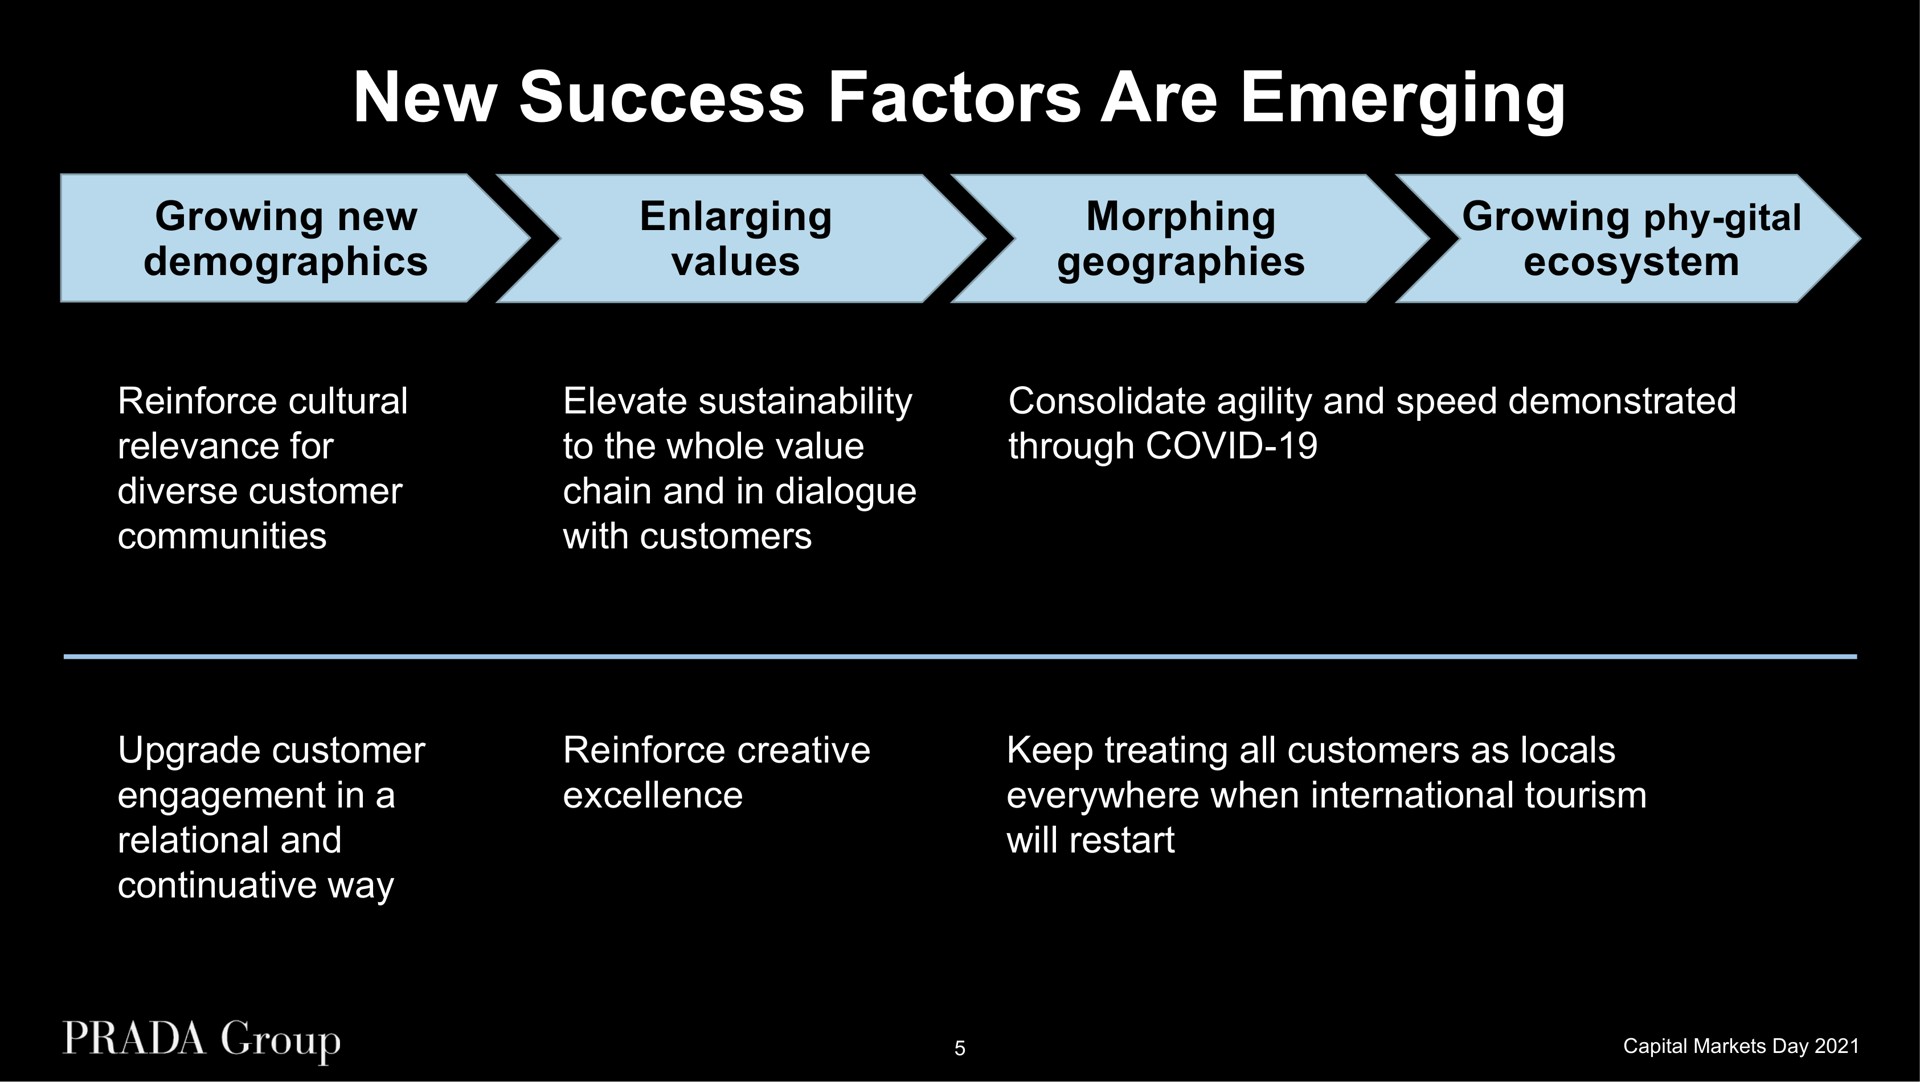 new success factors are emerging growing new demographics enlarging values morphing geographies growing ecosystem reinforce cultural relevance for diverse customer communities elevate to the whole value chain and in dialogue with customers consolidate agility and speed demonstrated through covid upgrade customer engagement in a relational and continuative way reinforce creative excellence keep treating all customers as locals everywhere when international tourism will restart | Prada